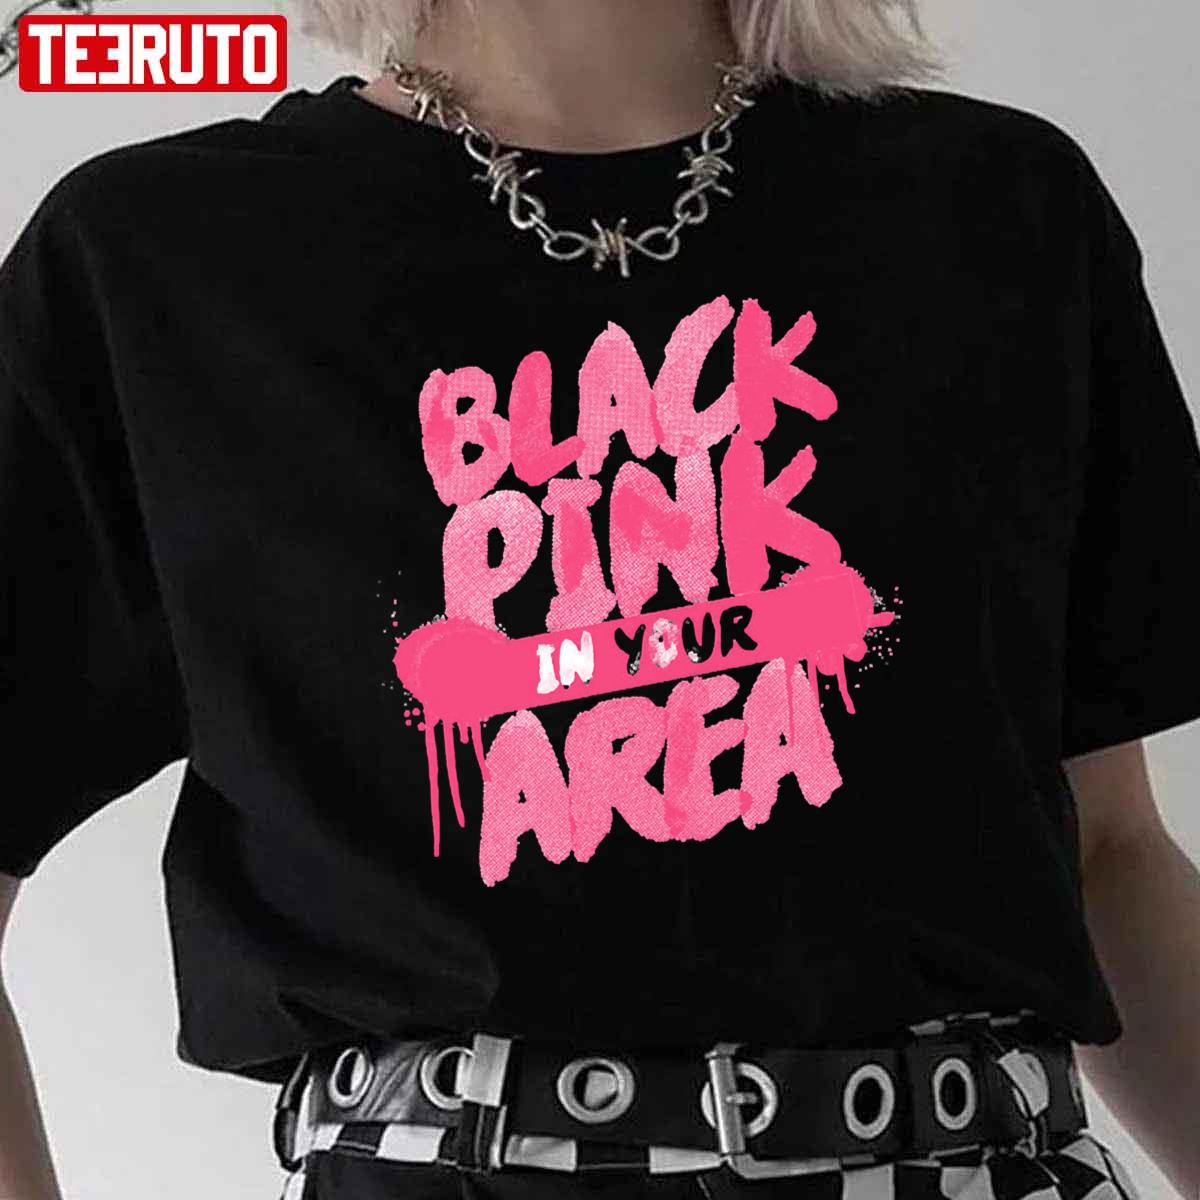 Blackpink in your AREA! Unisex T-Shirt